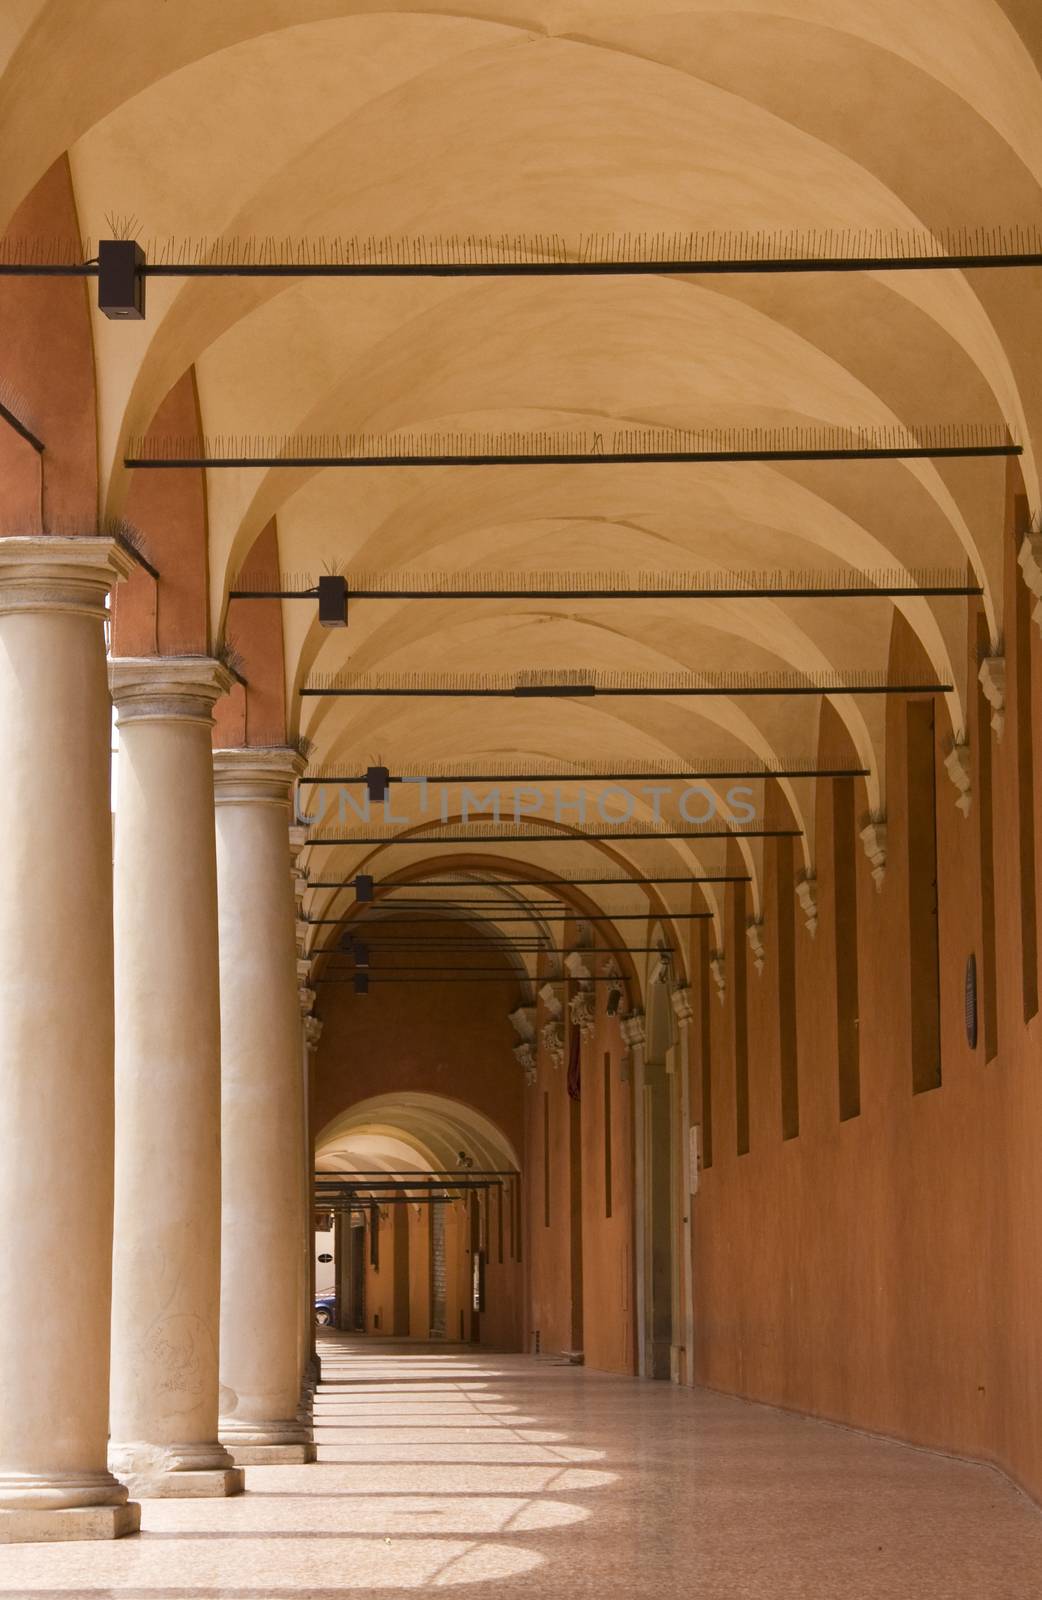 Medieval portico with columns in Bologna by fotoecho